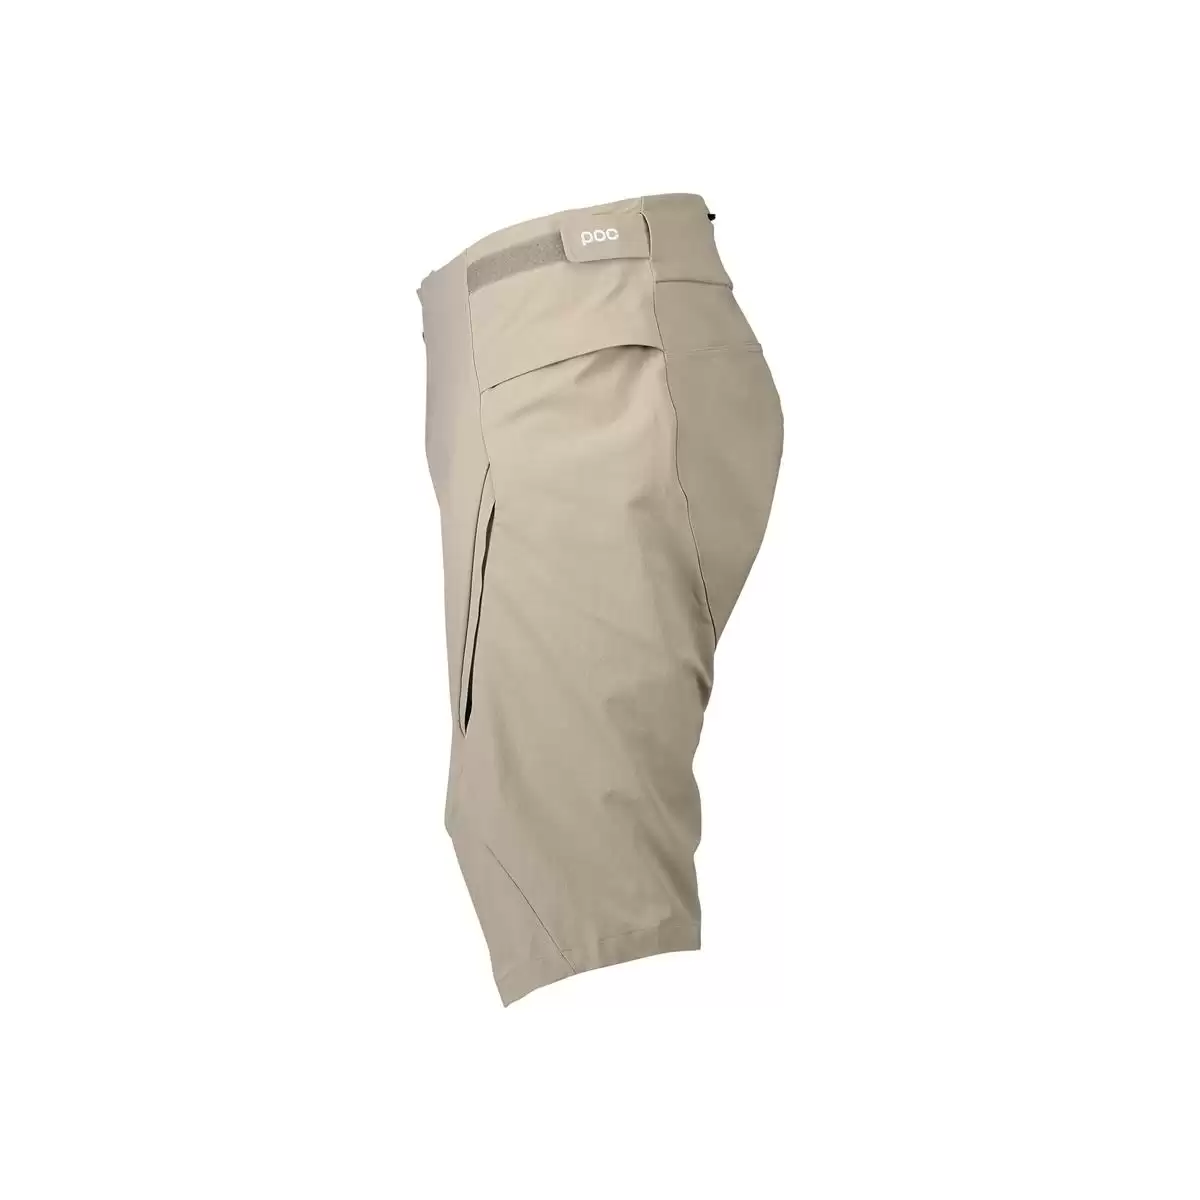 M's Infinite All-mountain shorts Moonstone Grey size M #1